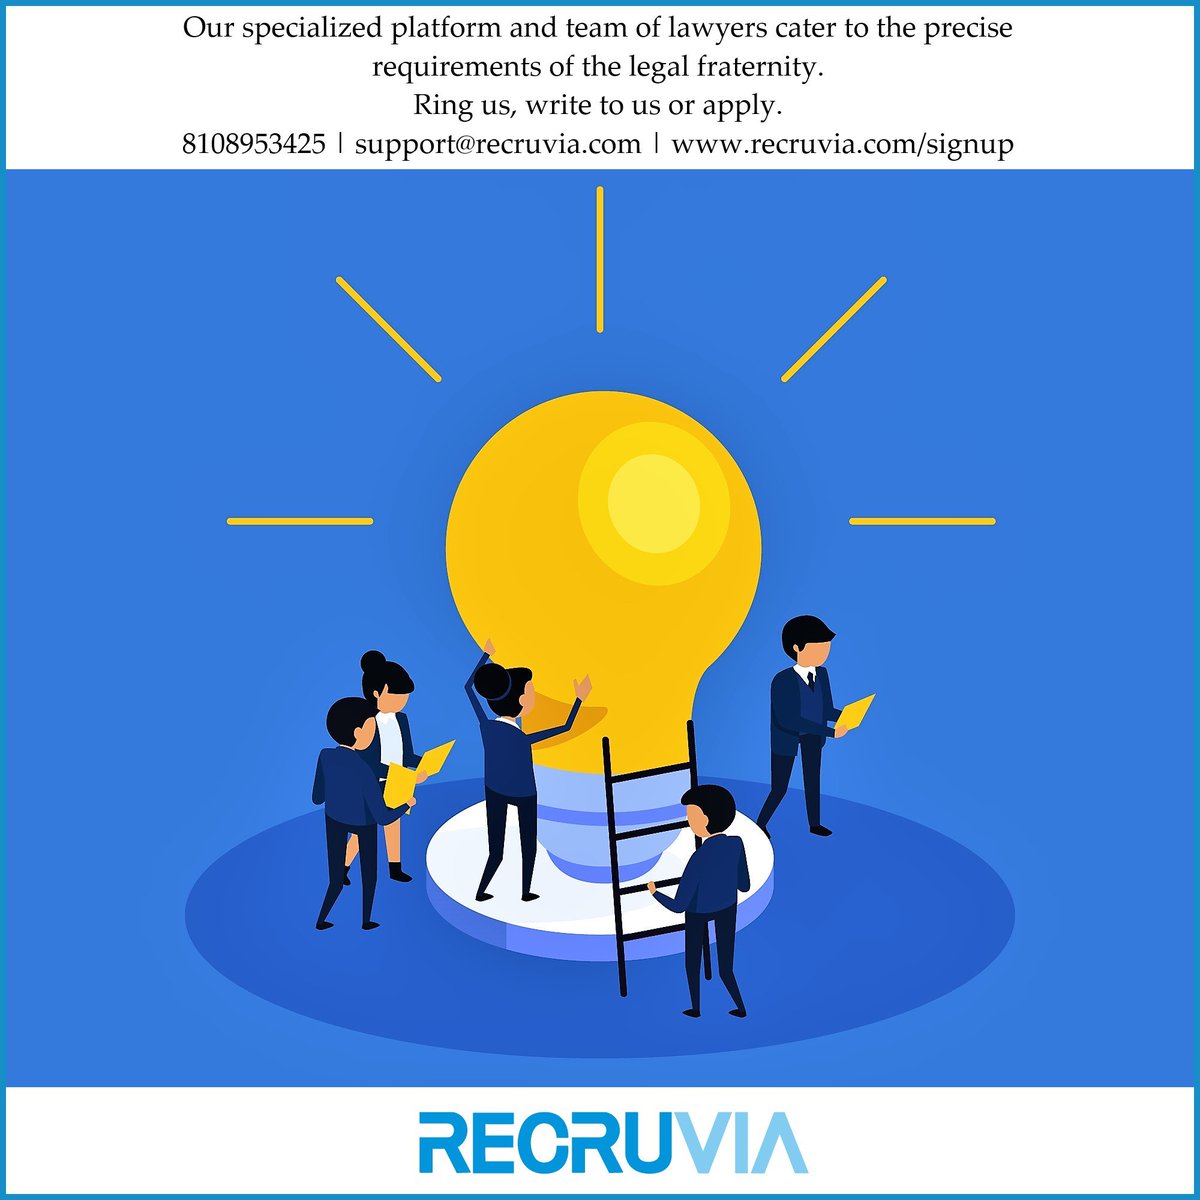 #Hotline: 81089LEGAL (8108953425) #Email: support@recruvia.com #Apply: recruvia.com/signup #legaljobs #jobsearch #recruvia #jobs #lawfirms #recruitment #recruiting #candidates #hiring #legalopenings #lawyer #lawyeropenings #openingsforlawyers #jobsforlawyers #hiringlawyers